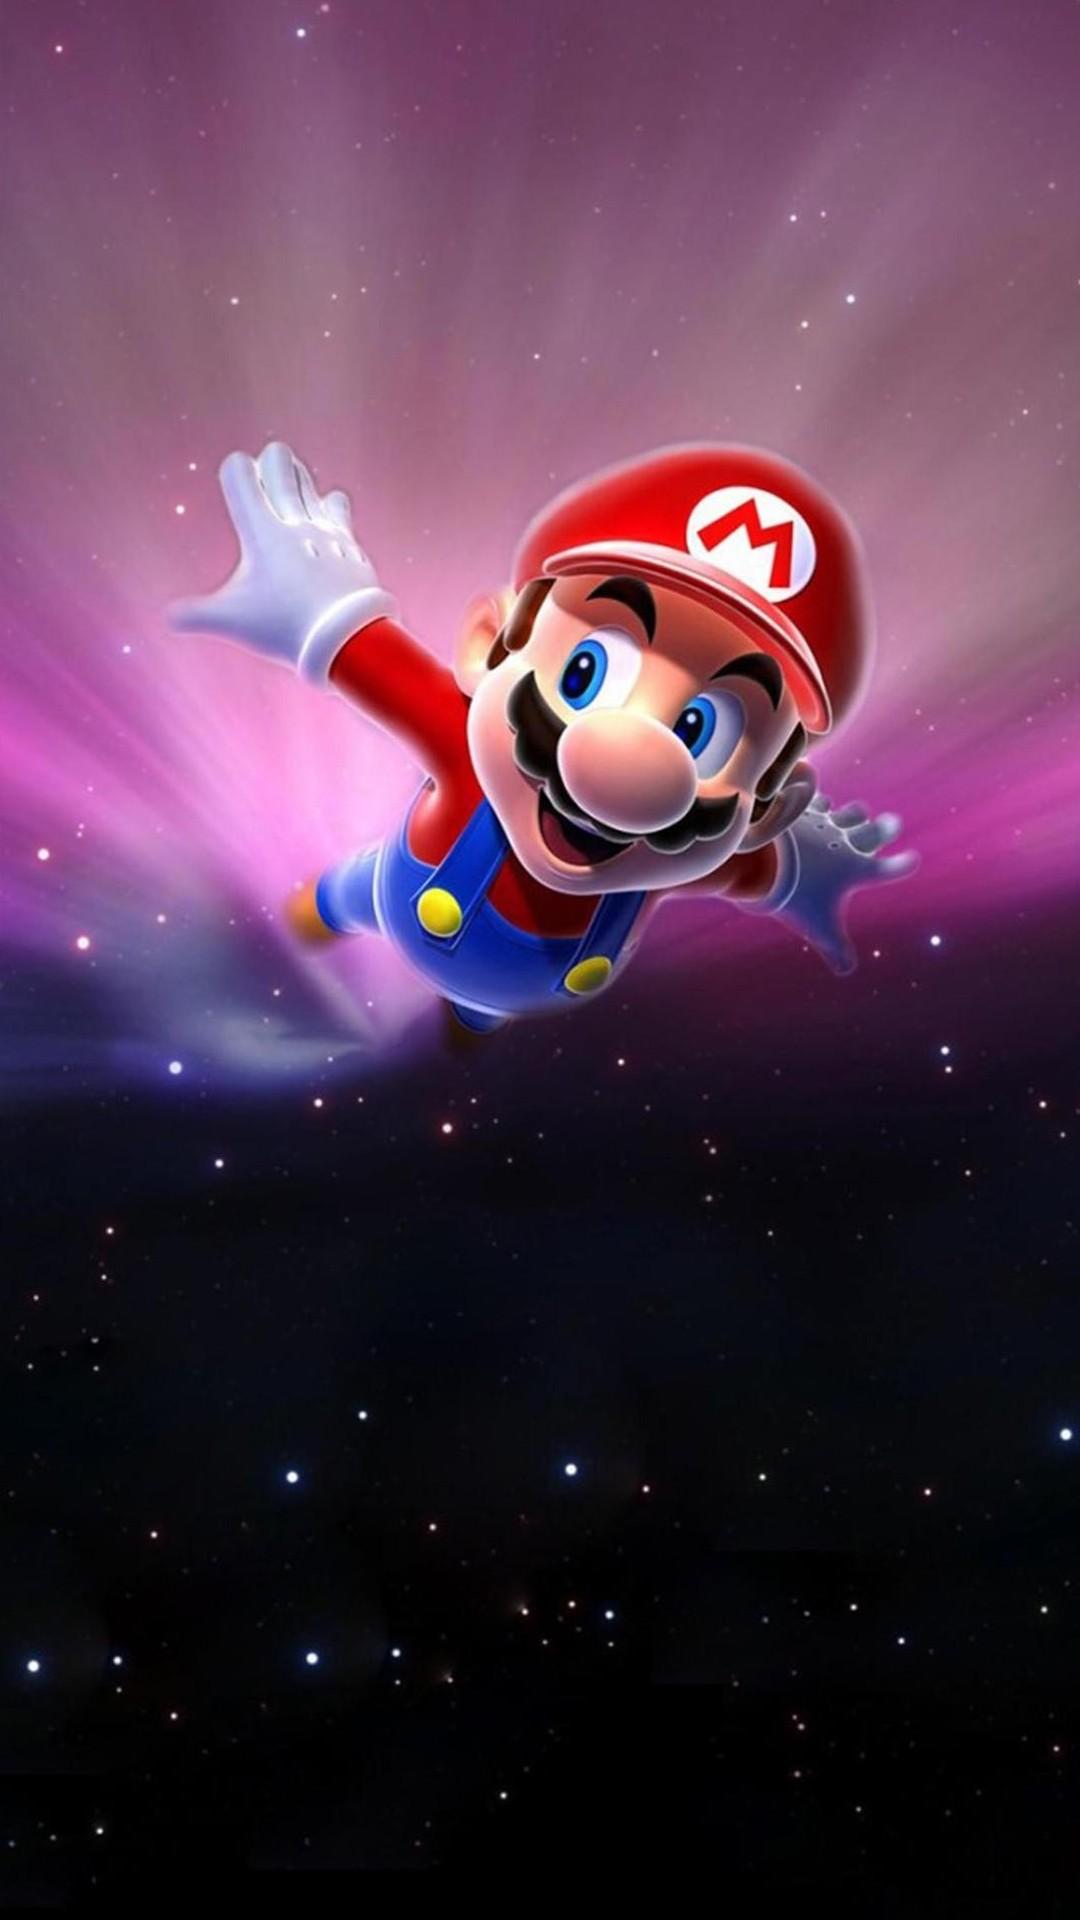 1080 x 1920 · jpeg - Super Mario - Best htc one wallpapers, free and easy to download